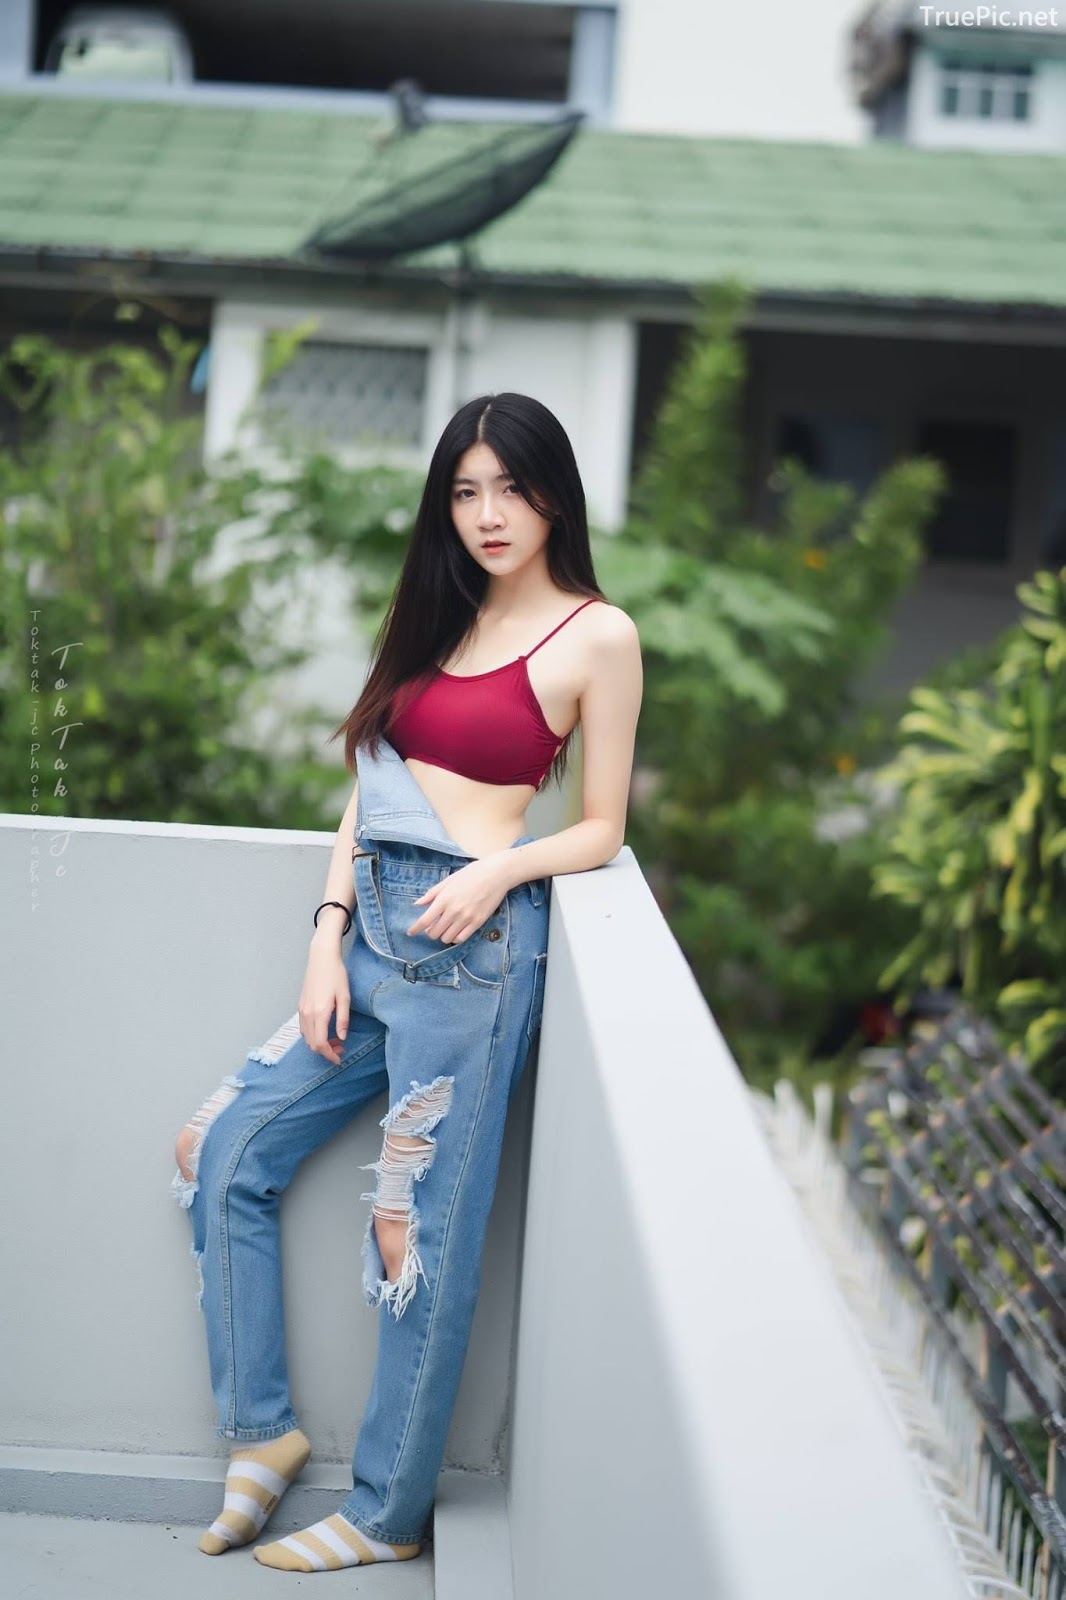 Thailand angel model Sasi Ngiunwan - Red plum bra and jean on a beautiful day - Picture 14